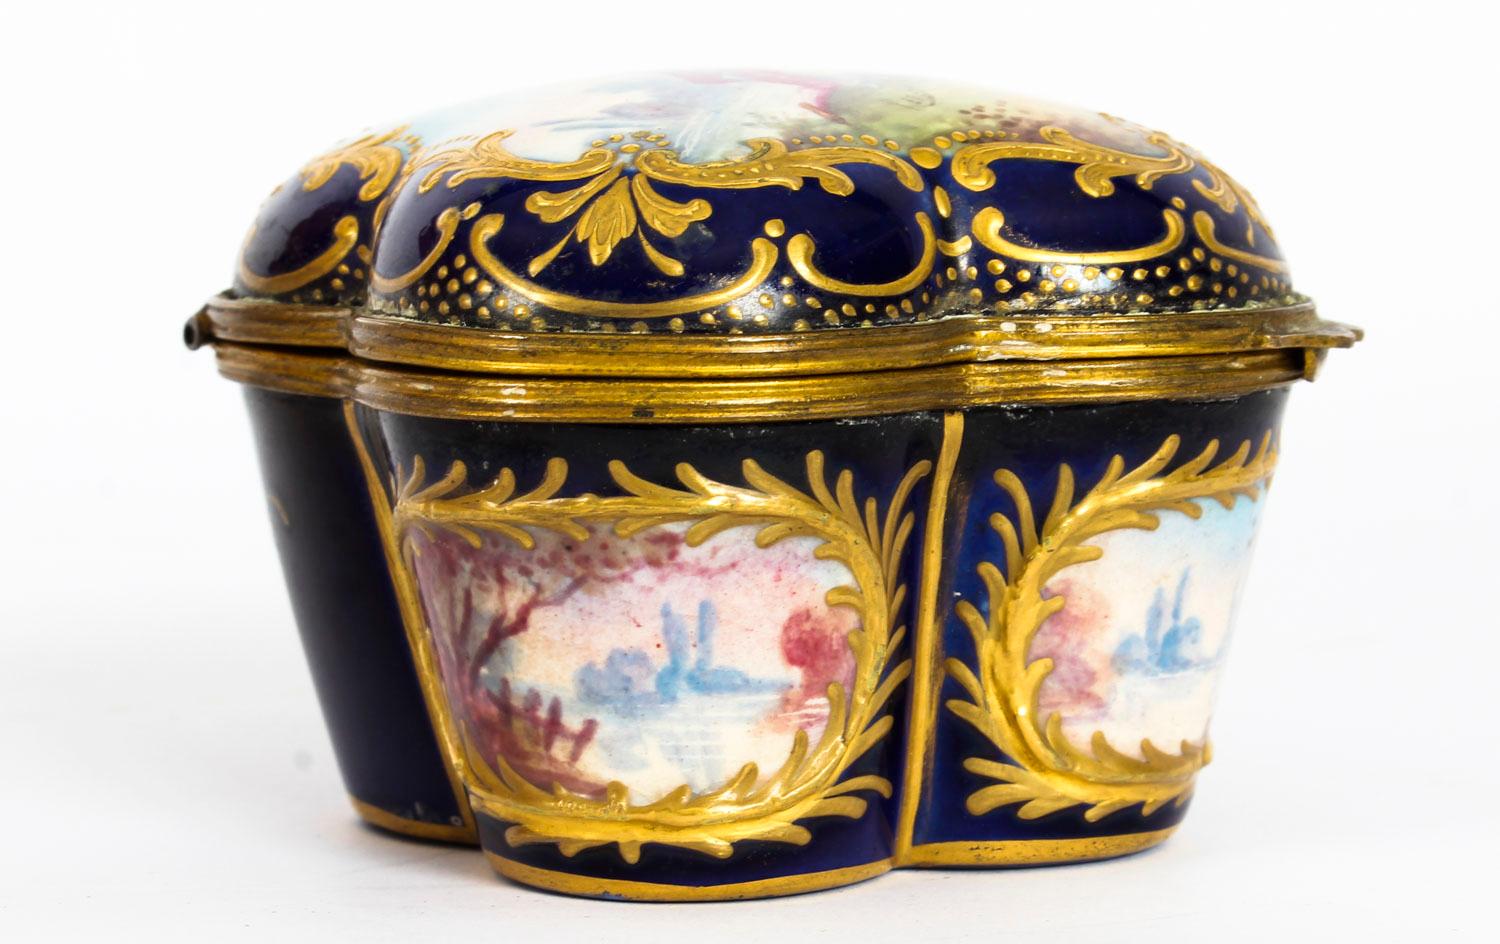 This is a fabulous antique French Sèvres Porcelain ormolu-mounted quatrefoil casket, circa 1860 in date.

The shaped hinged cover decorated with a hand painted courting couple in a richly gilded border, the front and sides decorated with oval